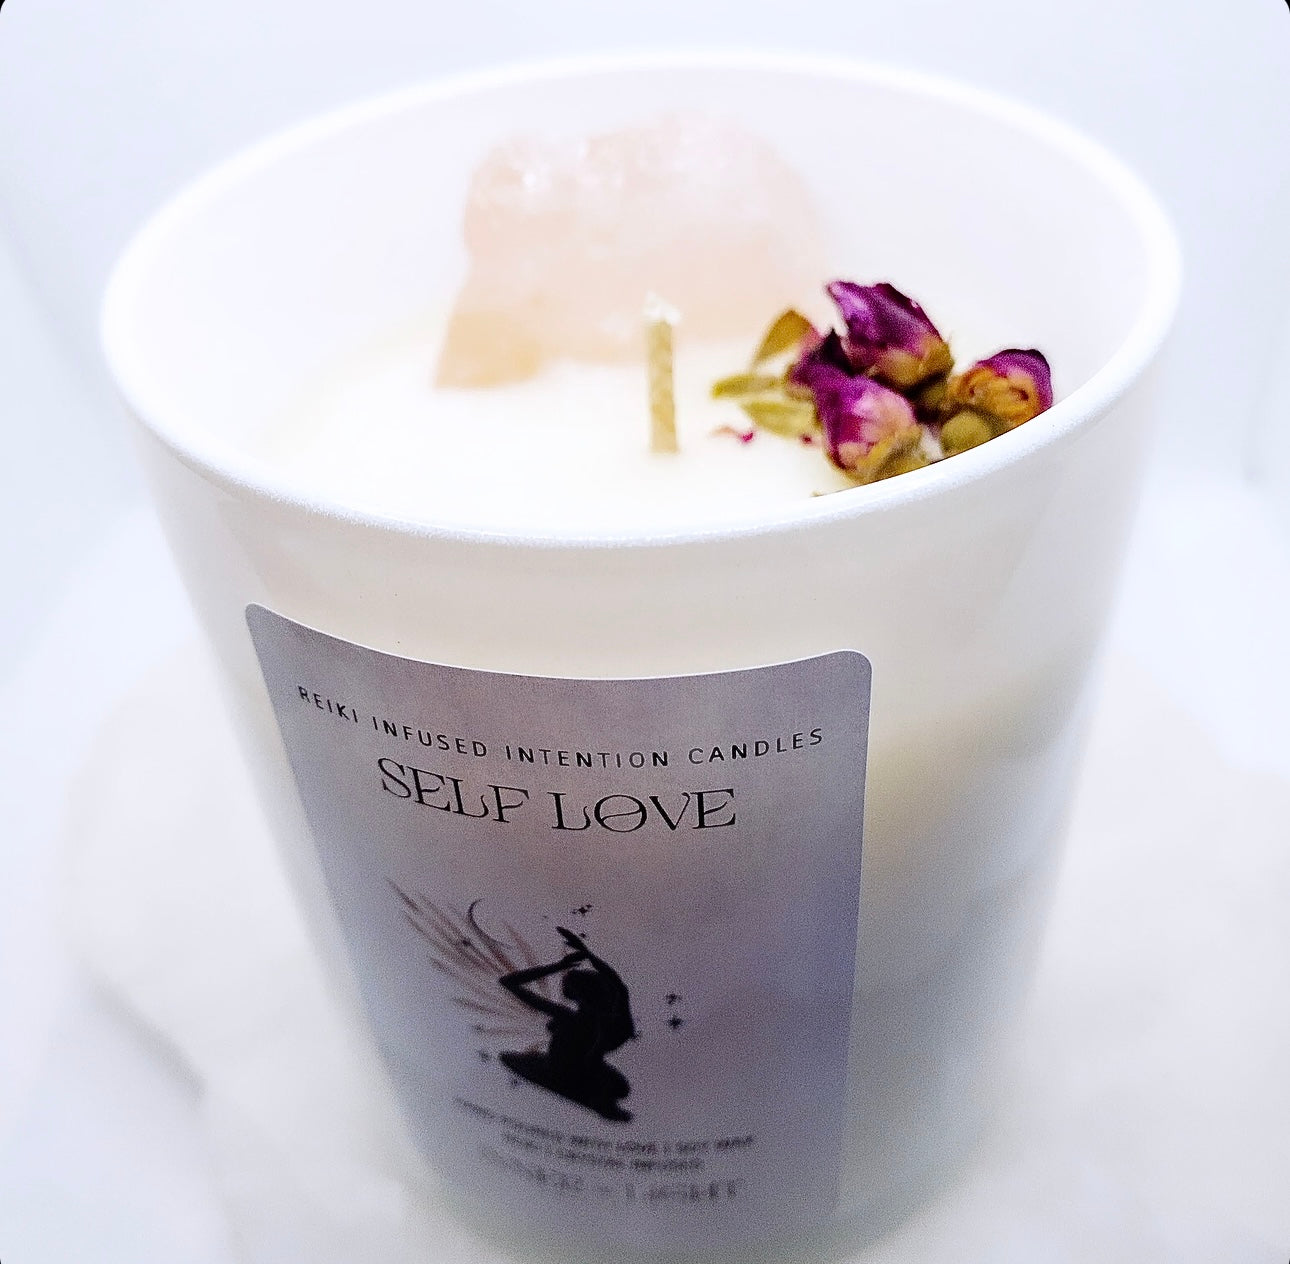 ‘Self Love’ - Reiki + Crystal Infused Candle ~ Indulge In This Large Rose Quartz Infused Candle